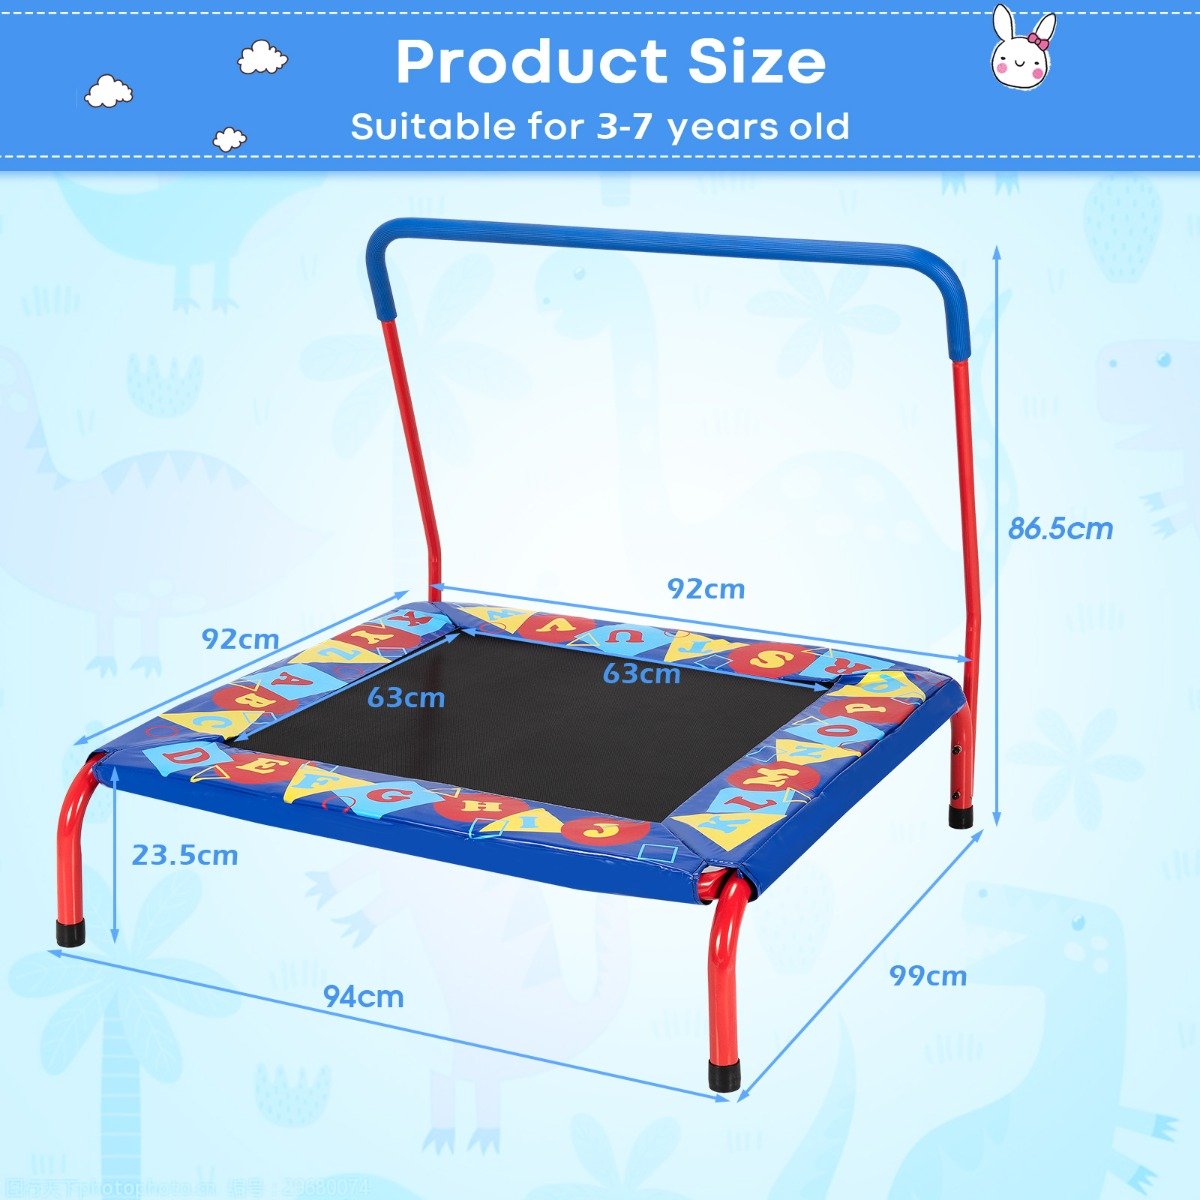 Playful Exercise: Square Toddler Trampoline with Foam Covered Handle for Kids